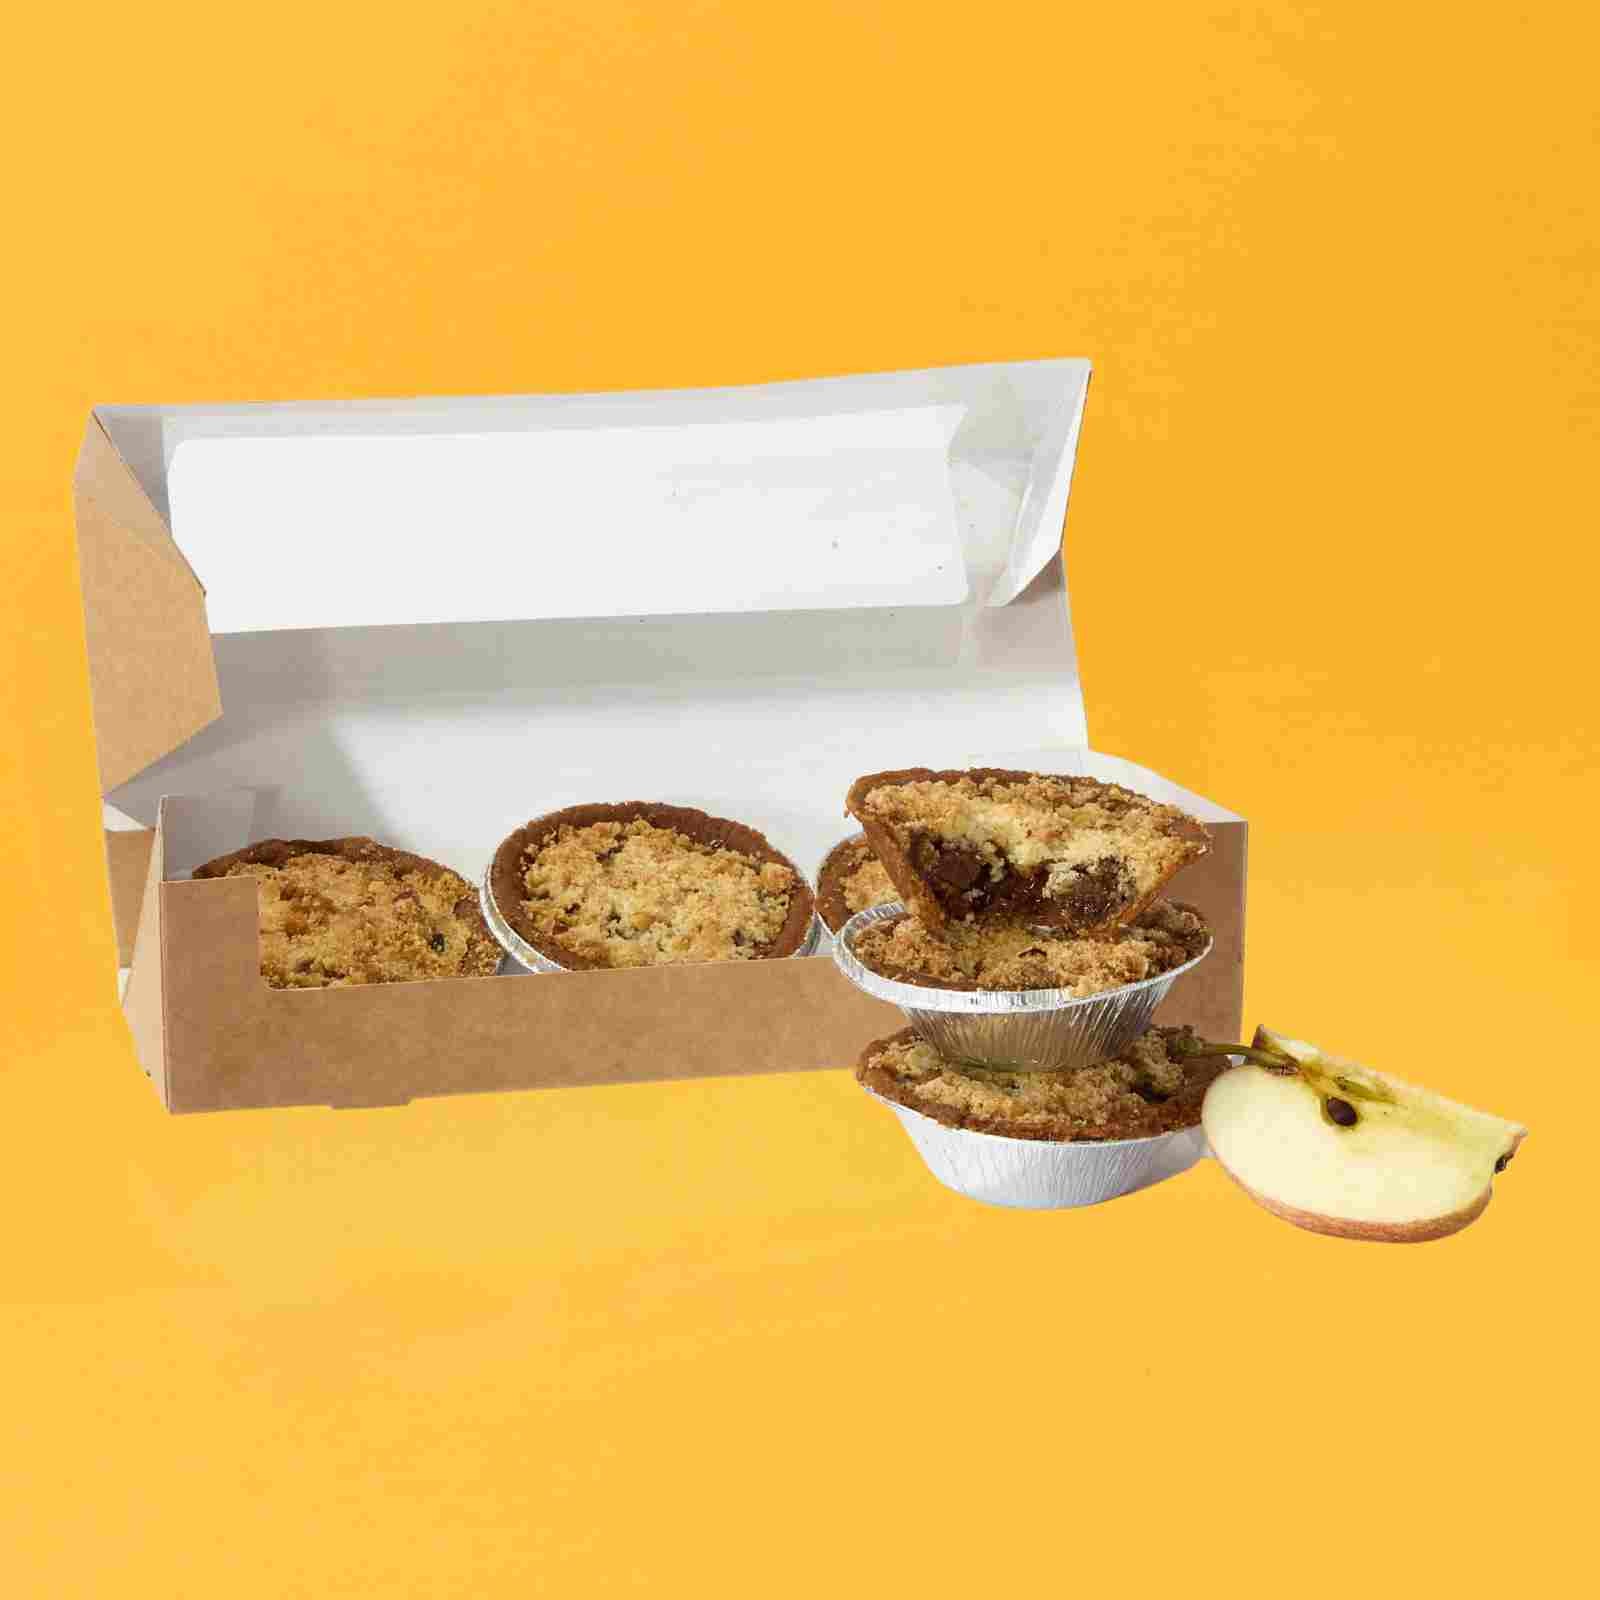 Two No Guilt Bakes Apple Crumble Tarts in a box on a yellow background.